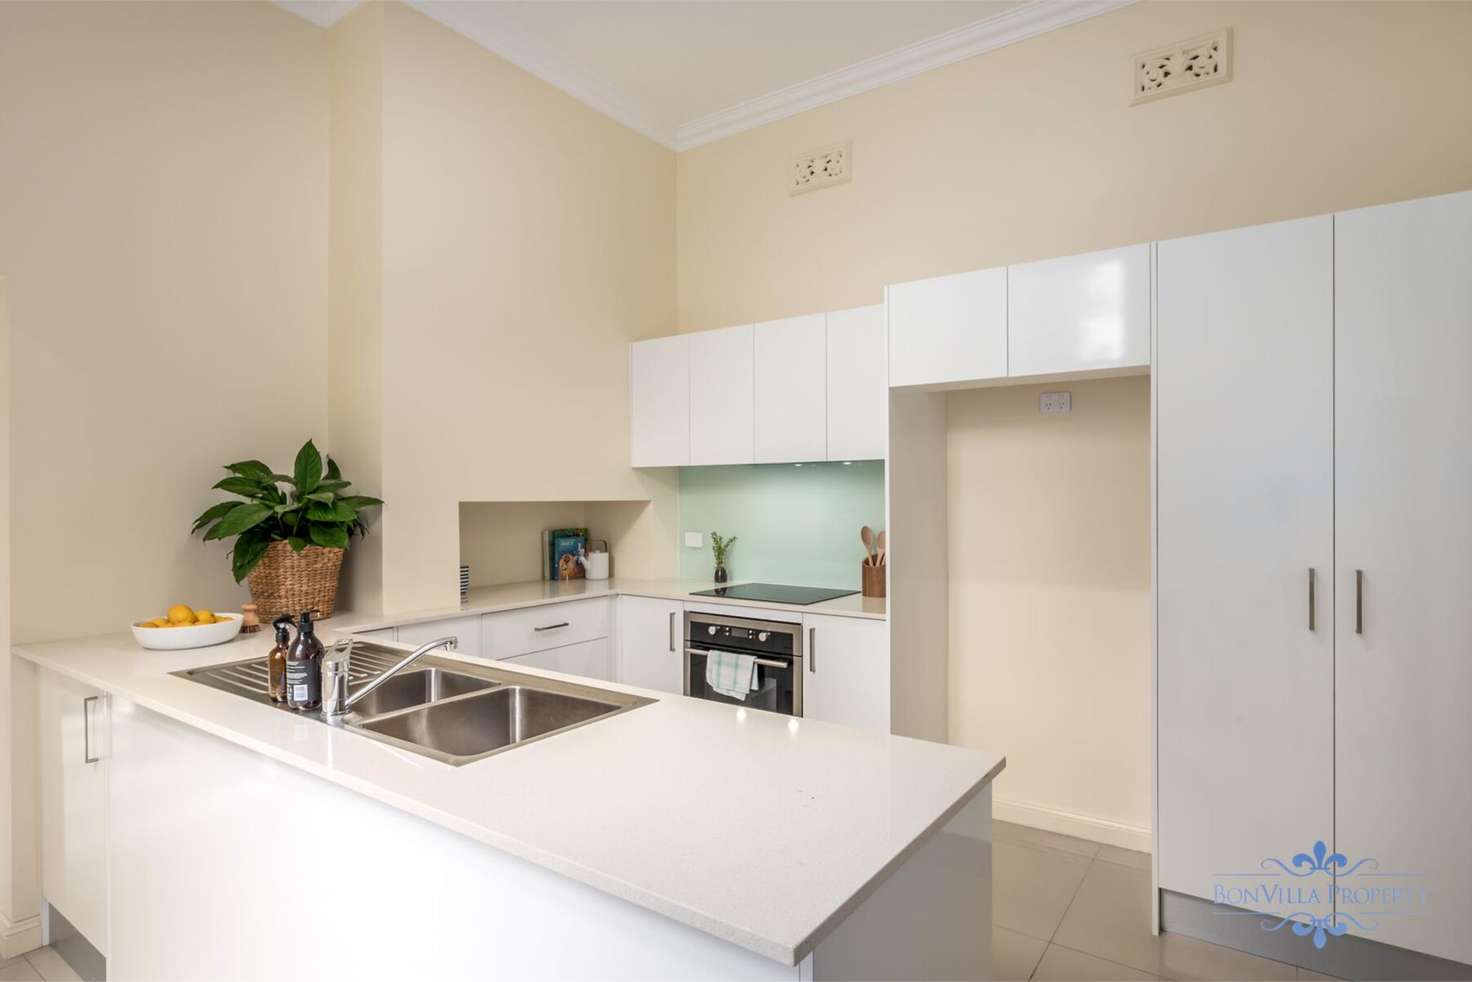 Main view of Homely house listing, 39 Perkins Street, Newcastle NSW 2300